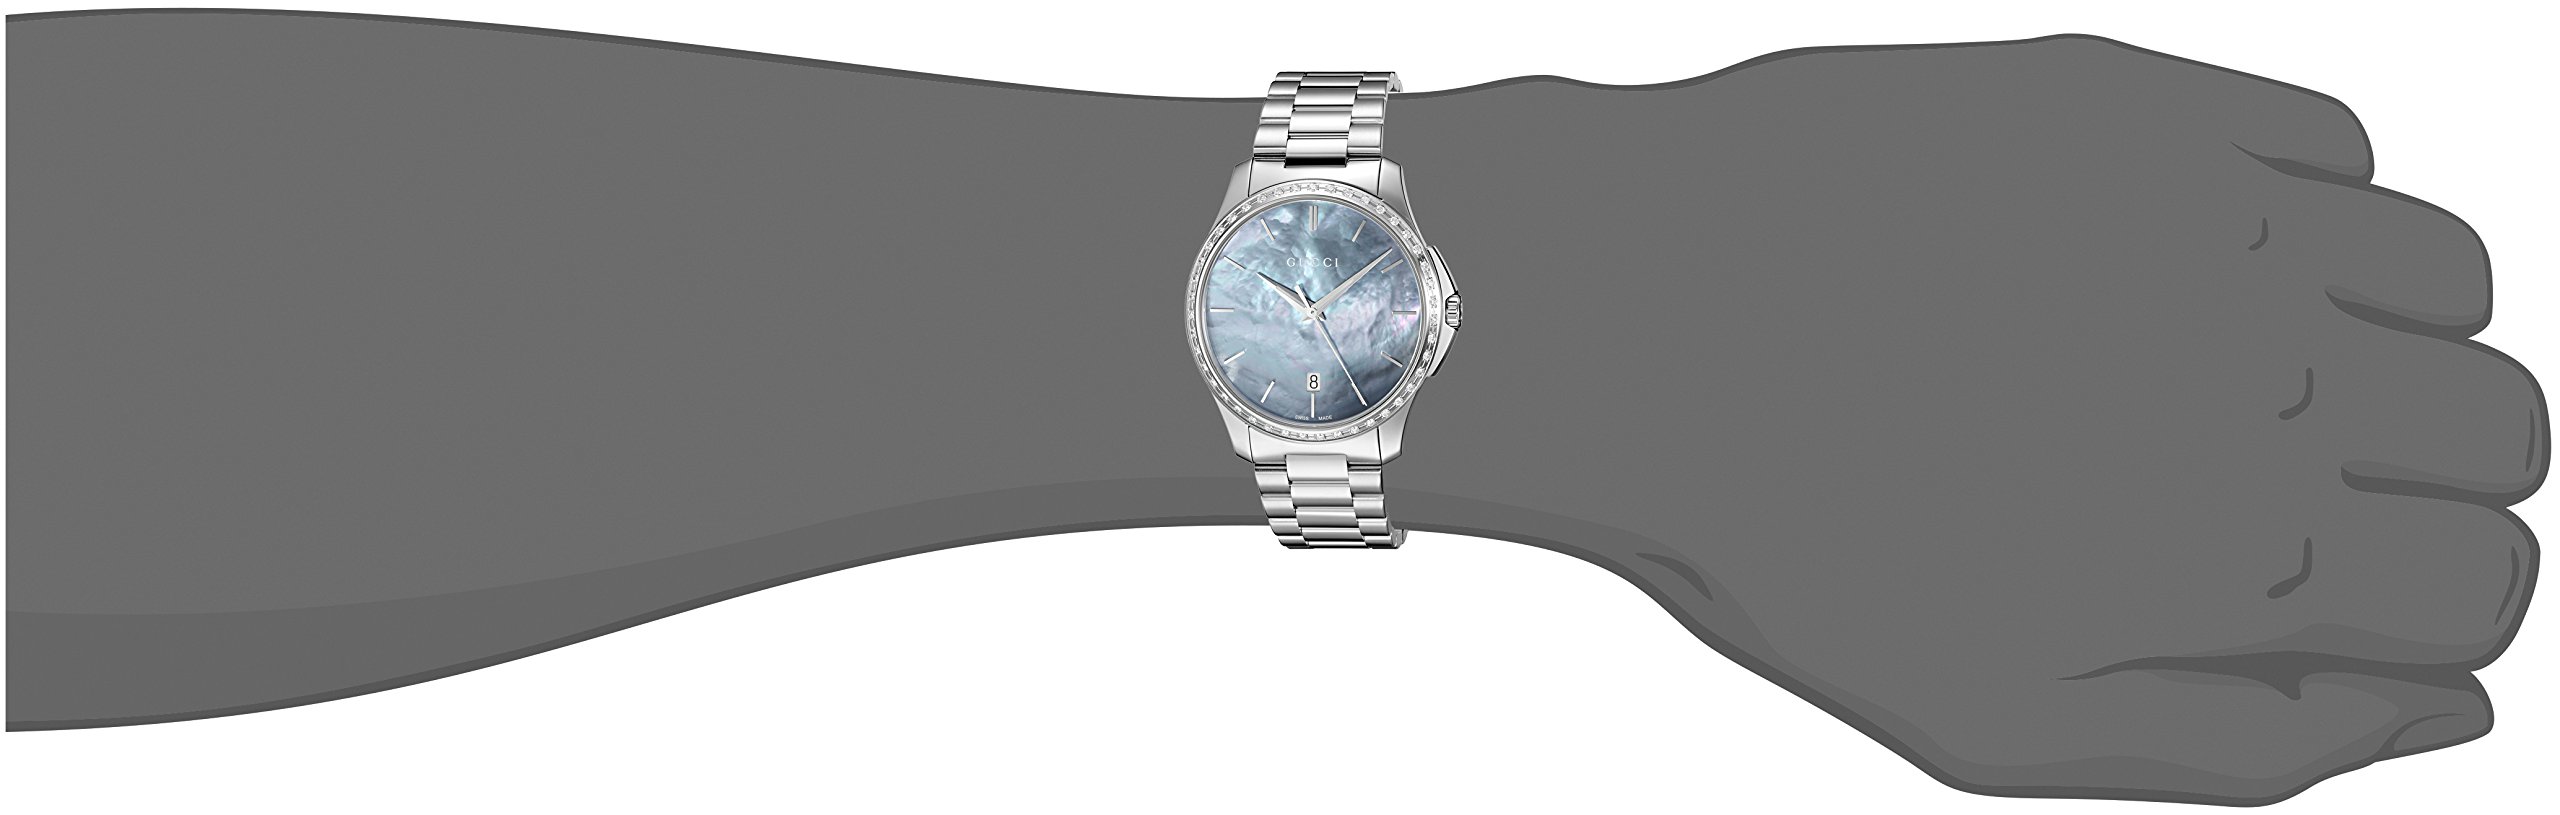 Gucci 'G-Timeless' Quartz Stainless Steel Silver-Toned Watch(Model: YA126458)